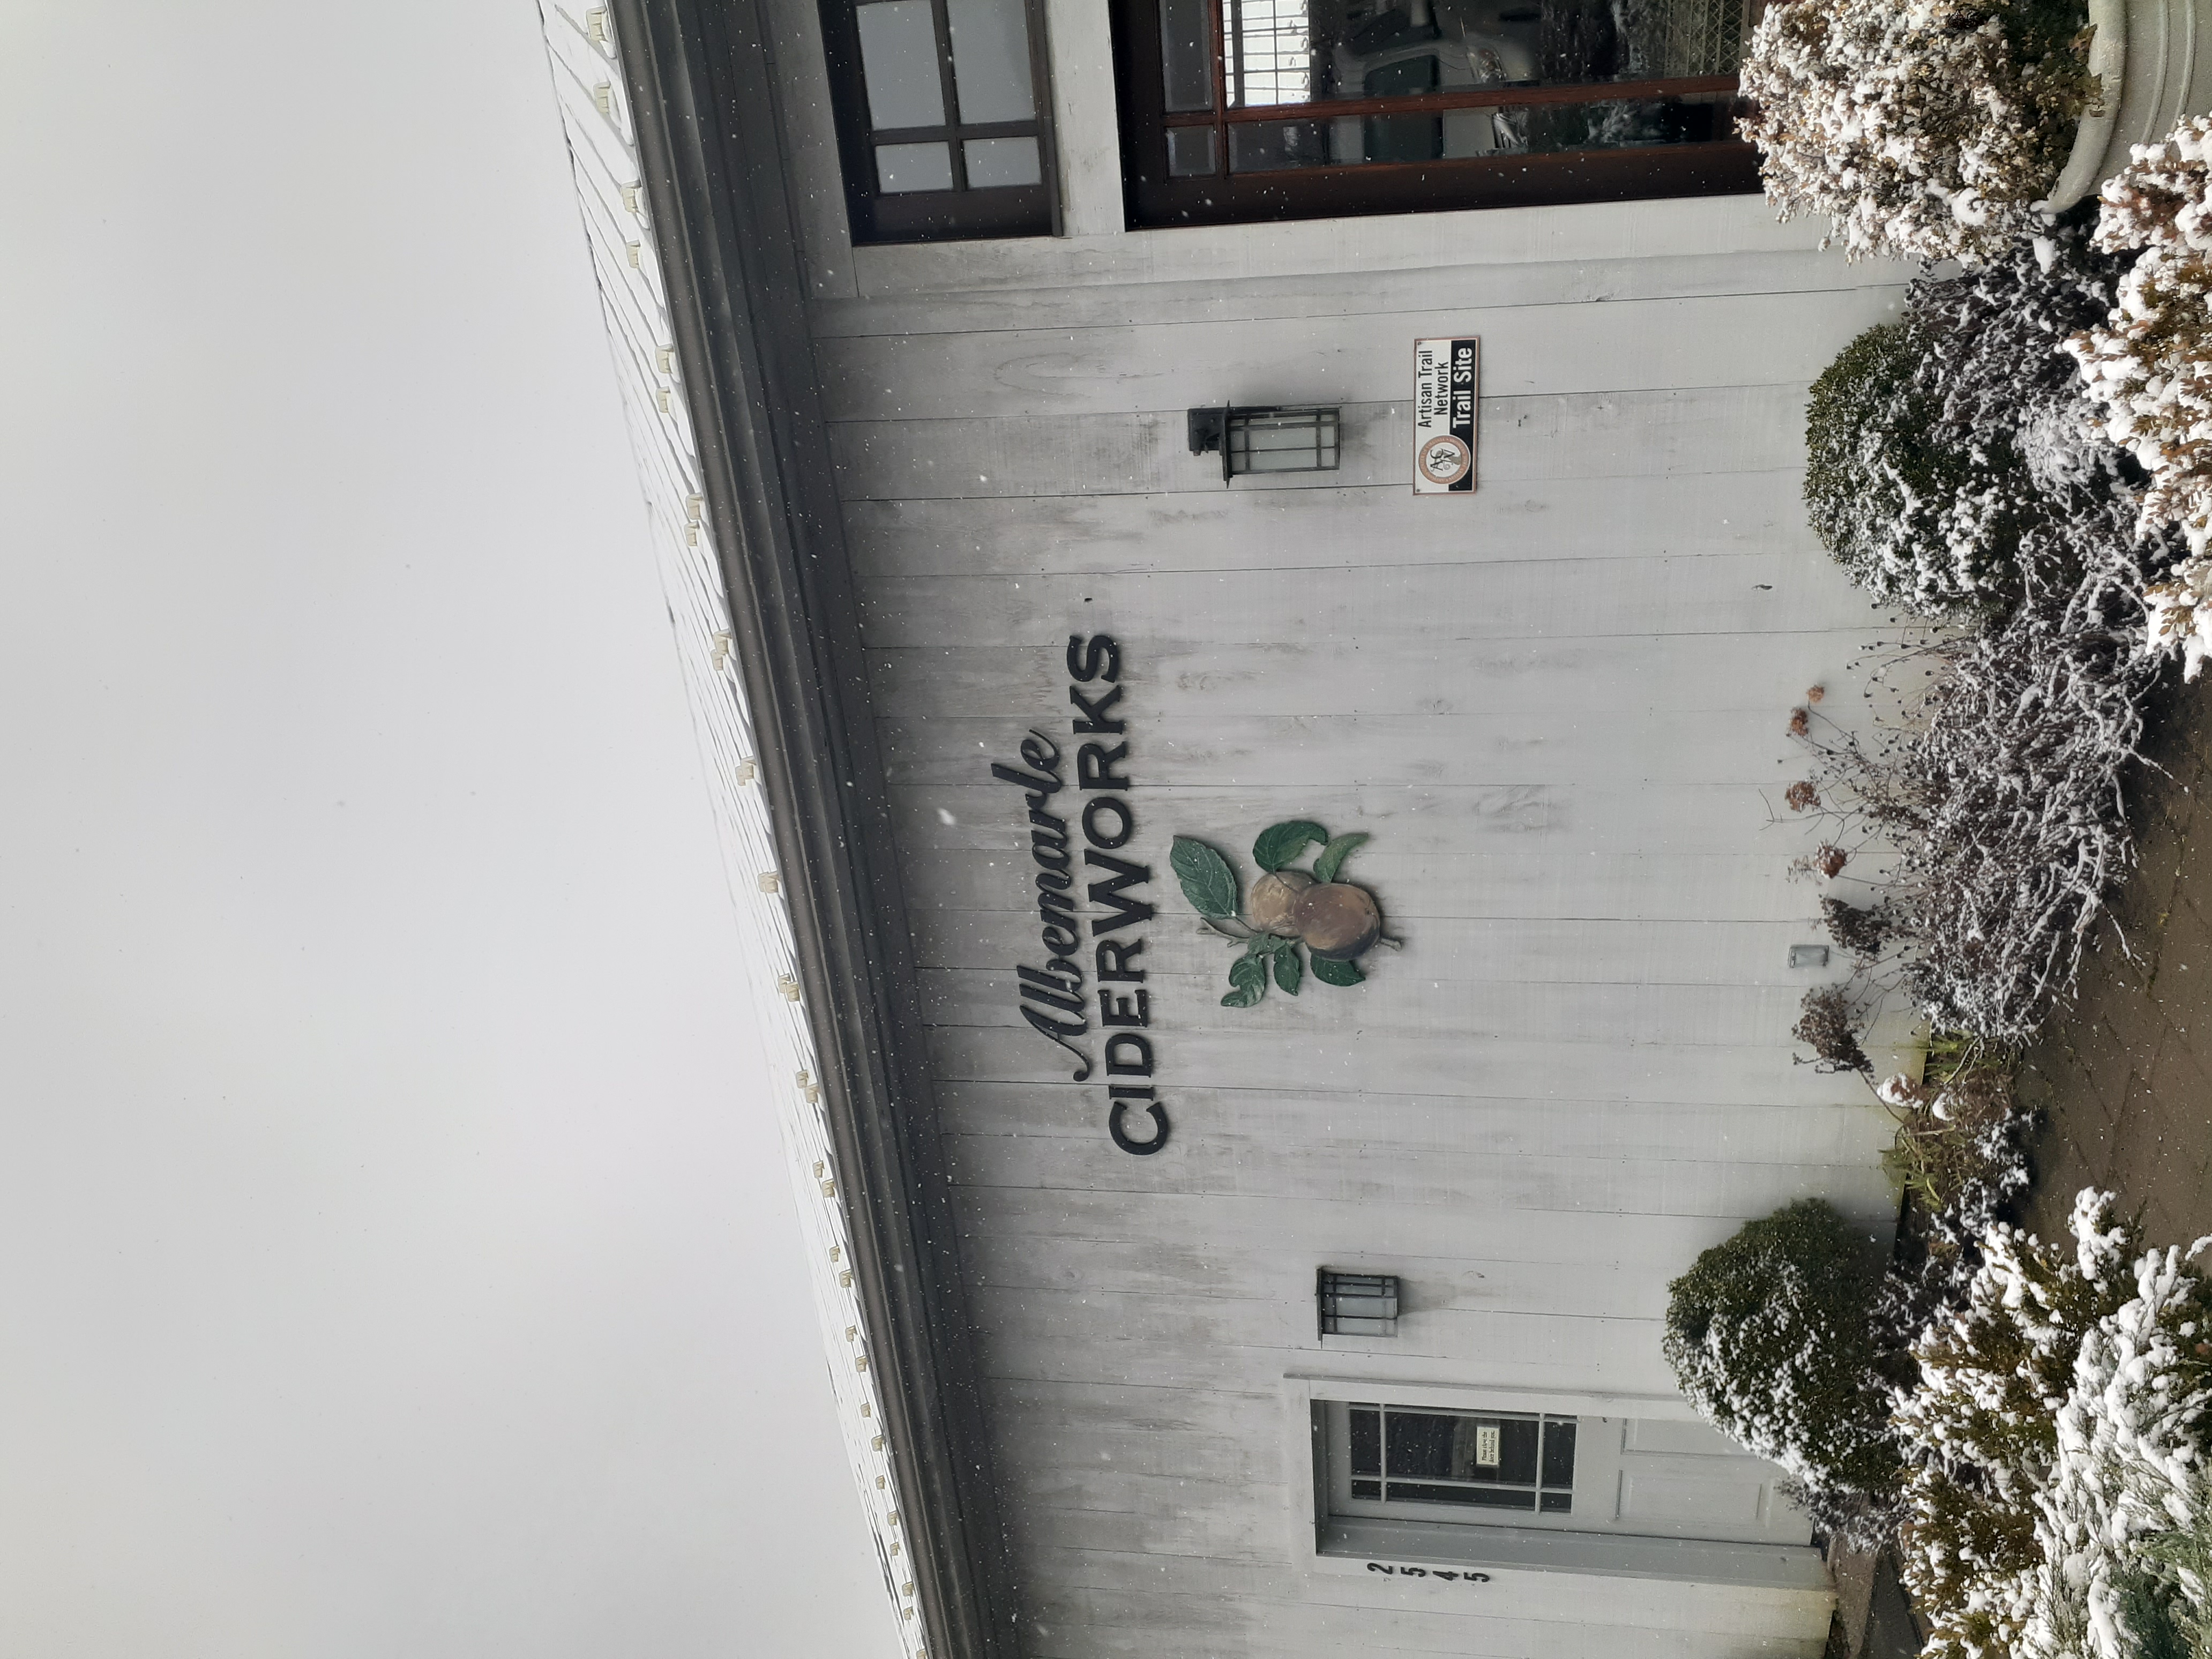 The front of a building with snow peppered around and the Albemarle CiderWorks sign on it.